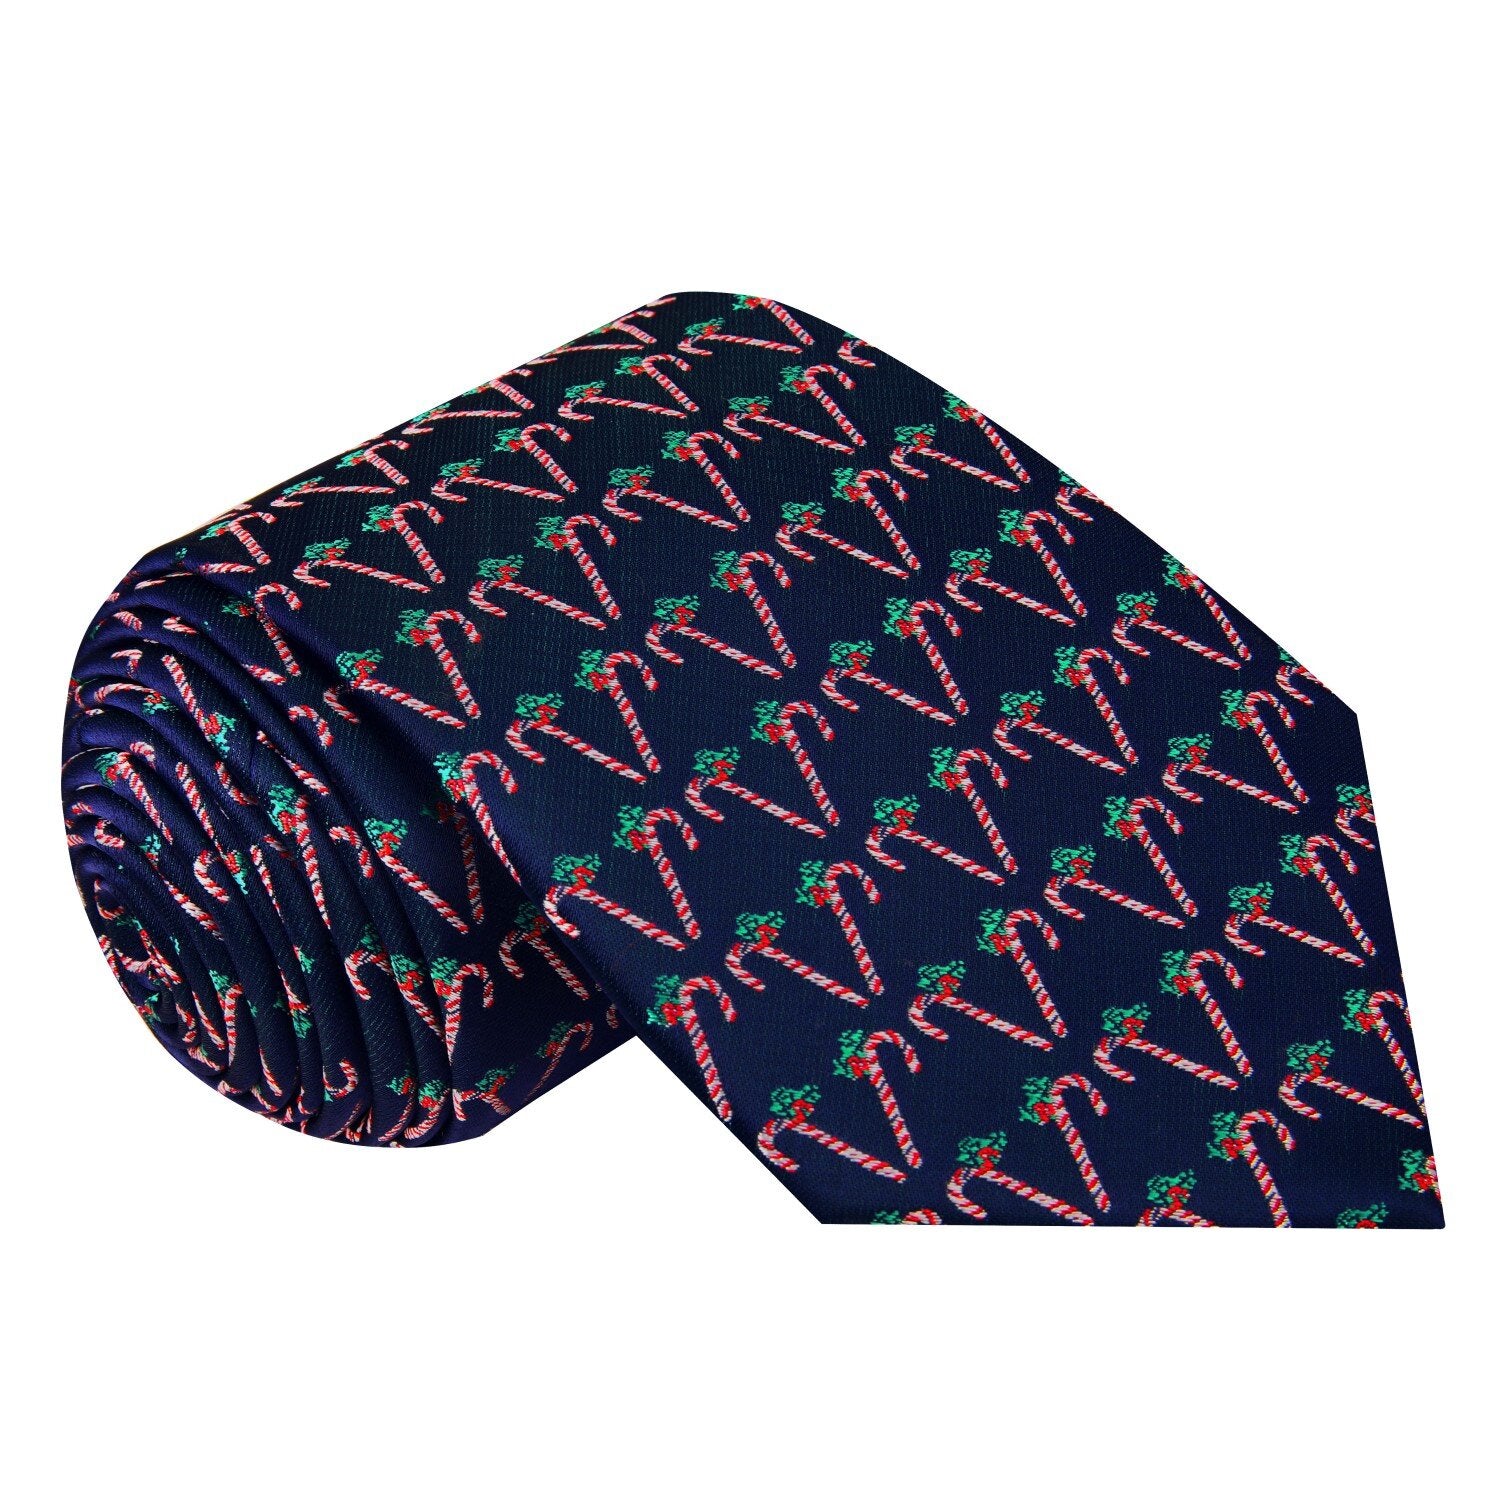 Blue, White, Green Candy Canes Tie 